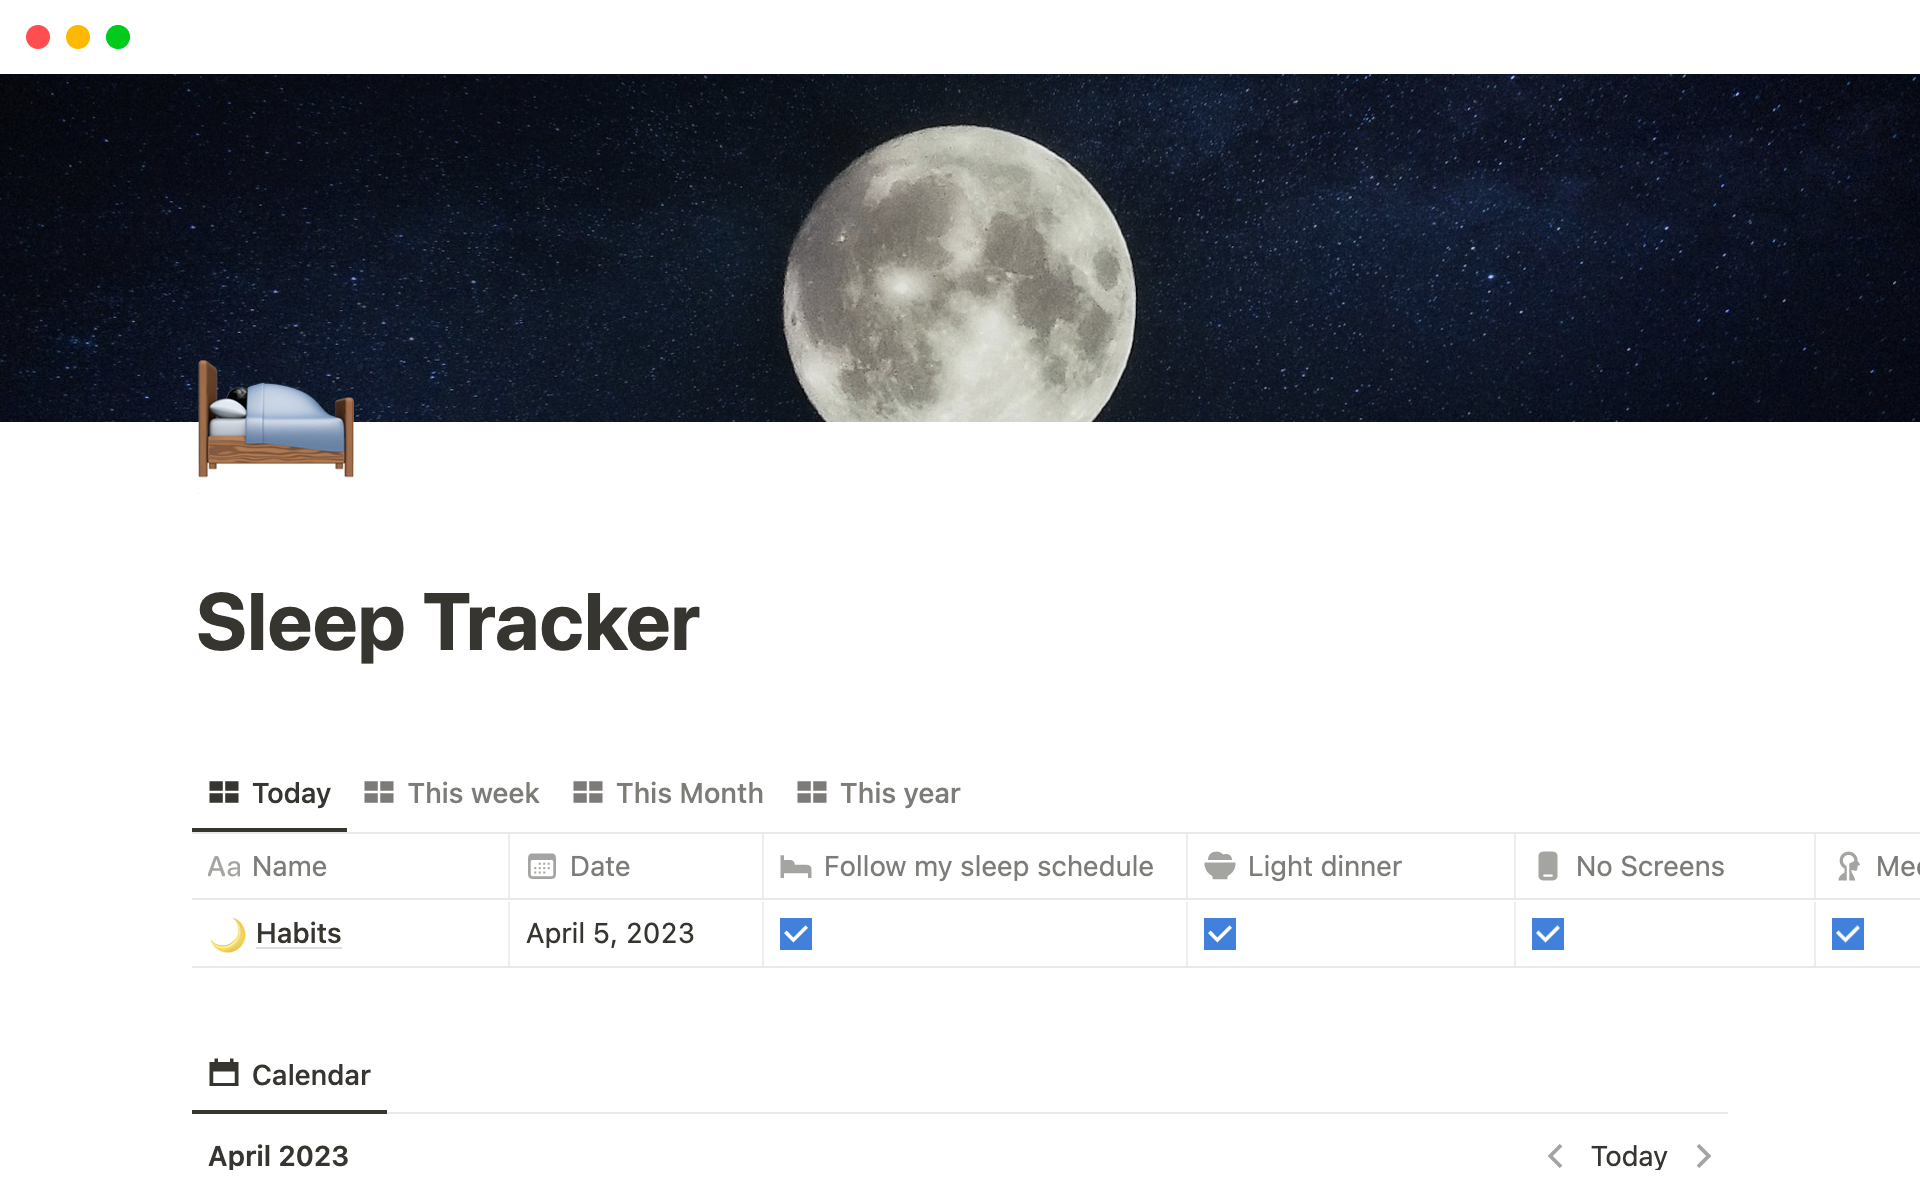 Sleep tracker helps people track their sleep patterns in daily, weekly, monthly view.